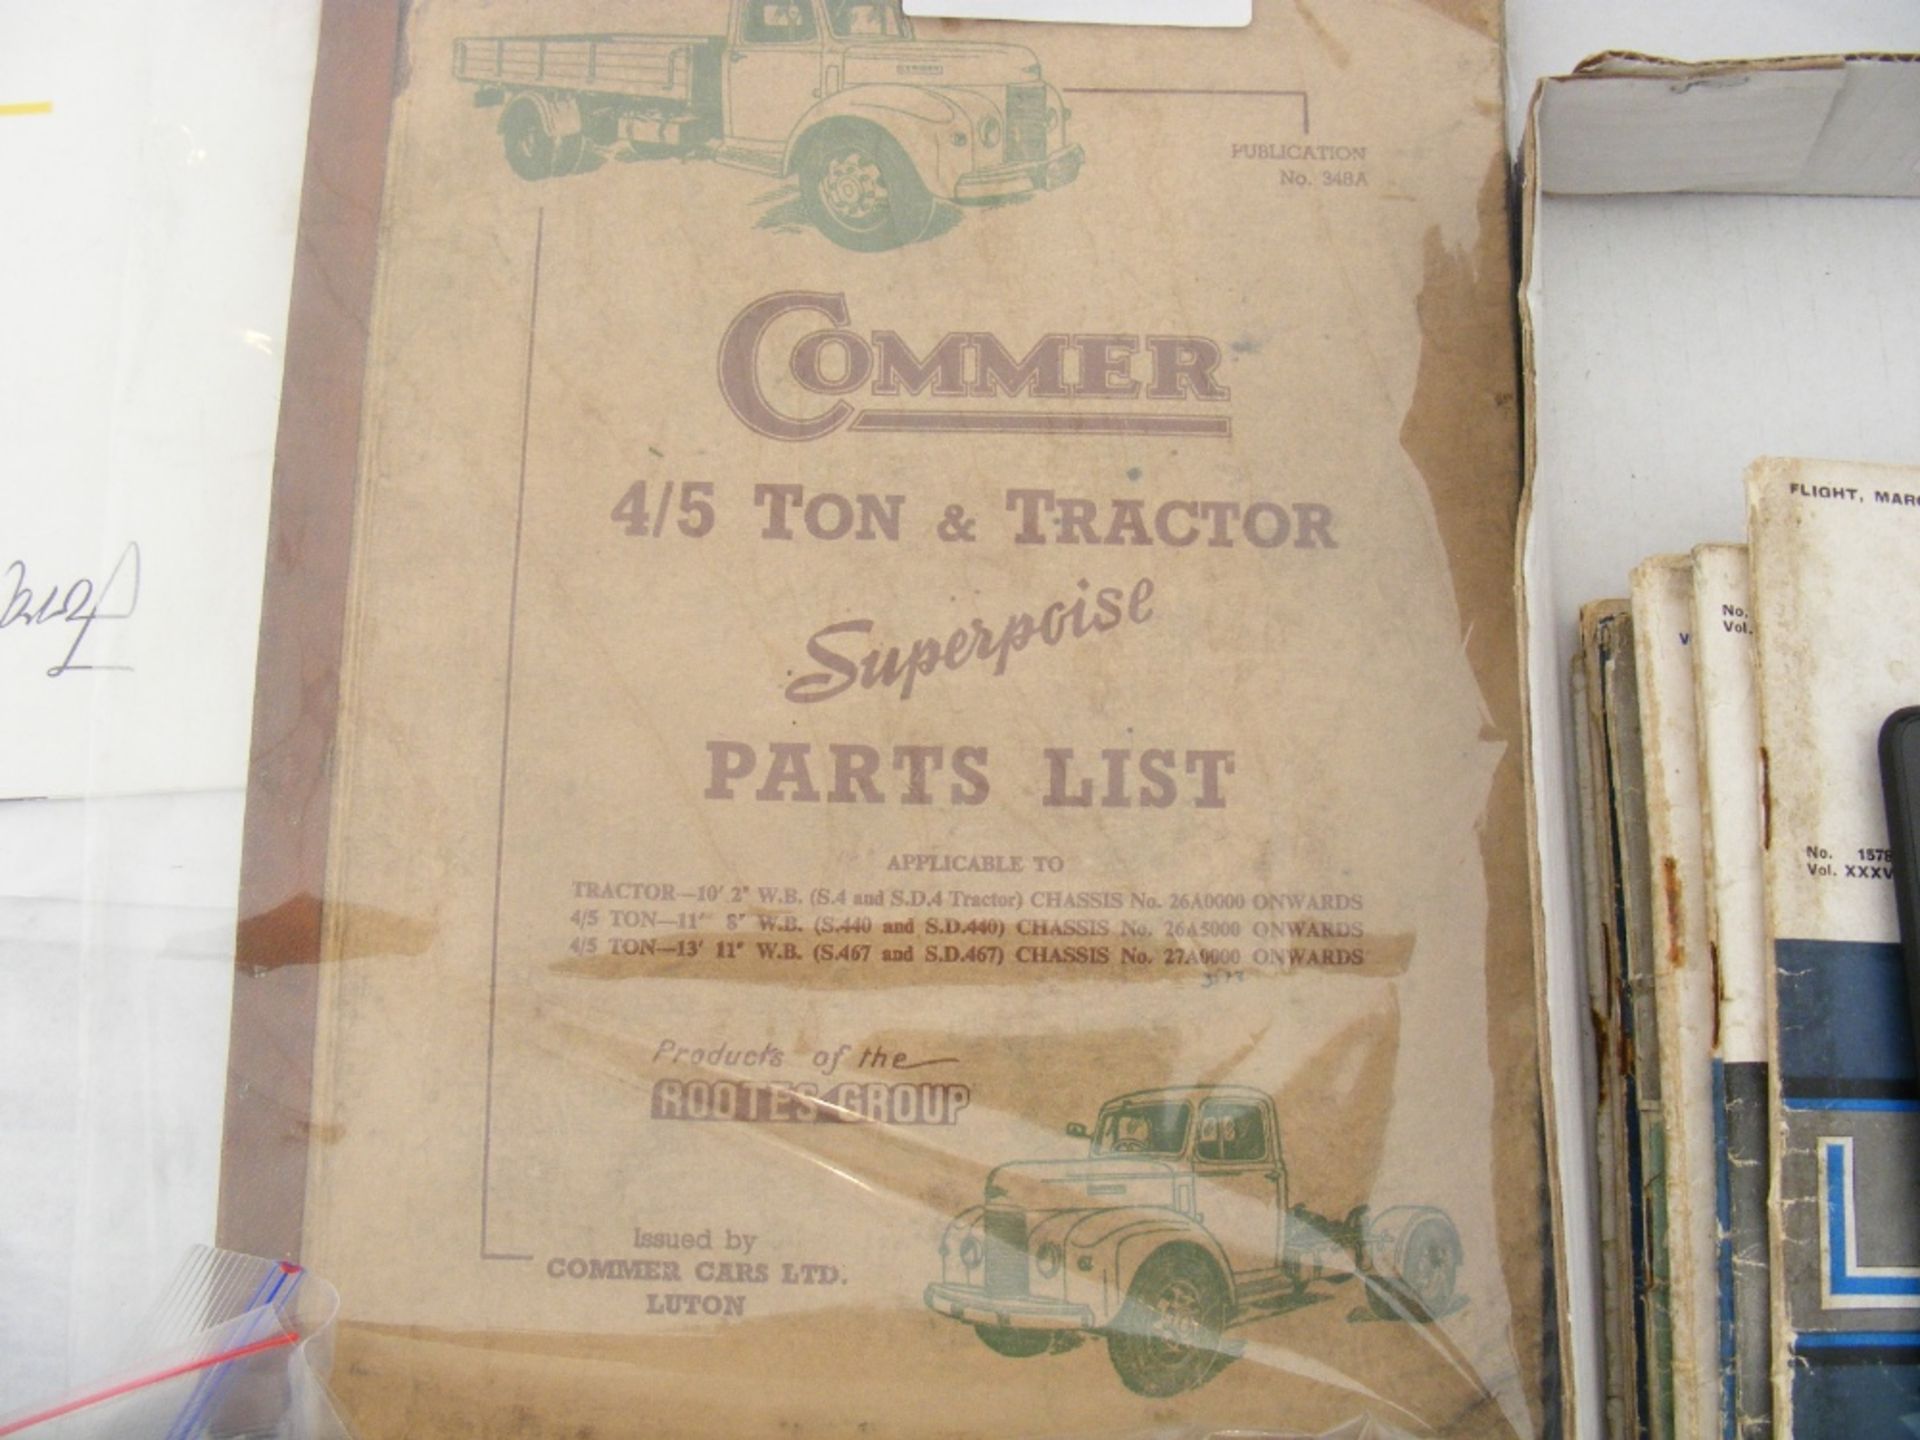 1952 Commer 4/5ton & tractor Superpoise parts list (183 pp)